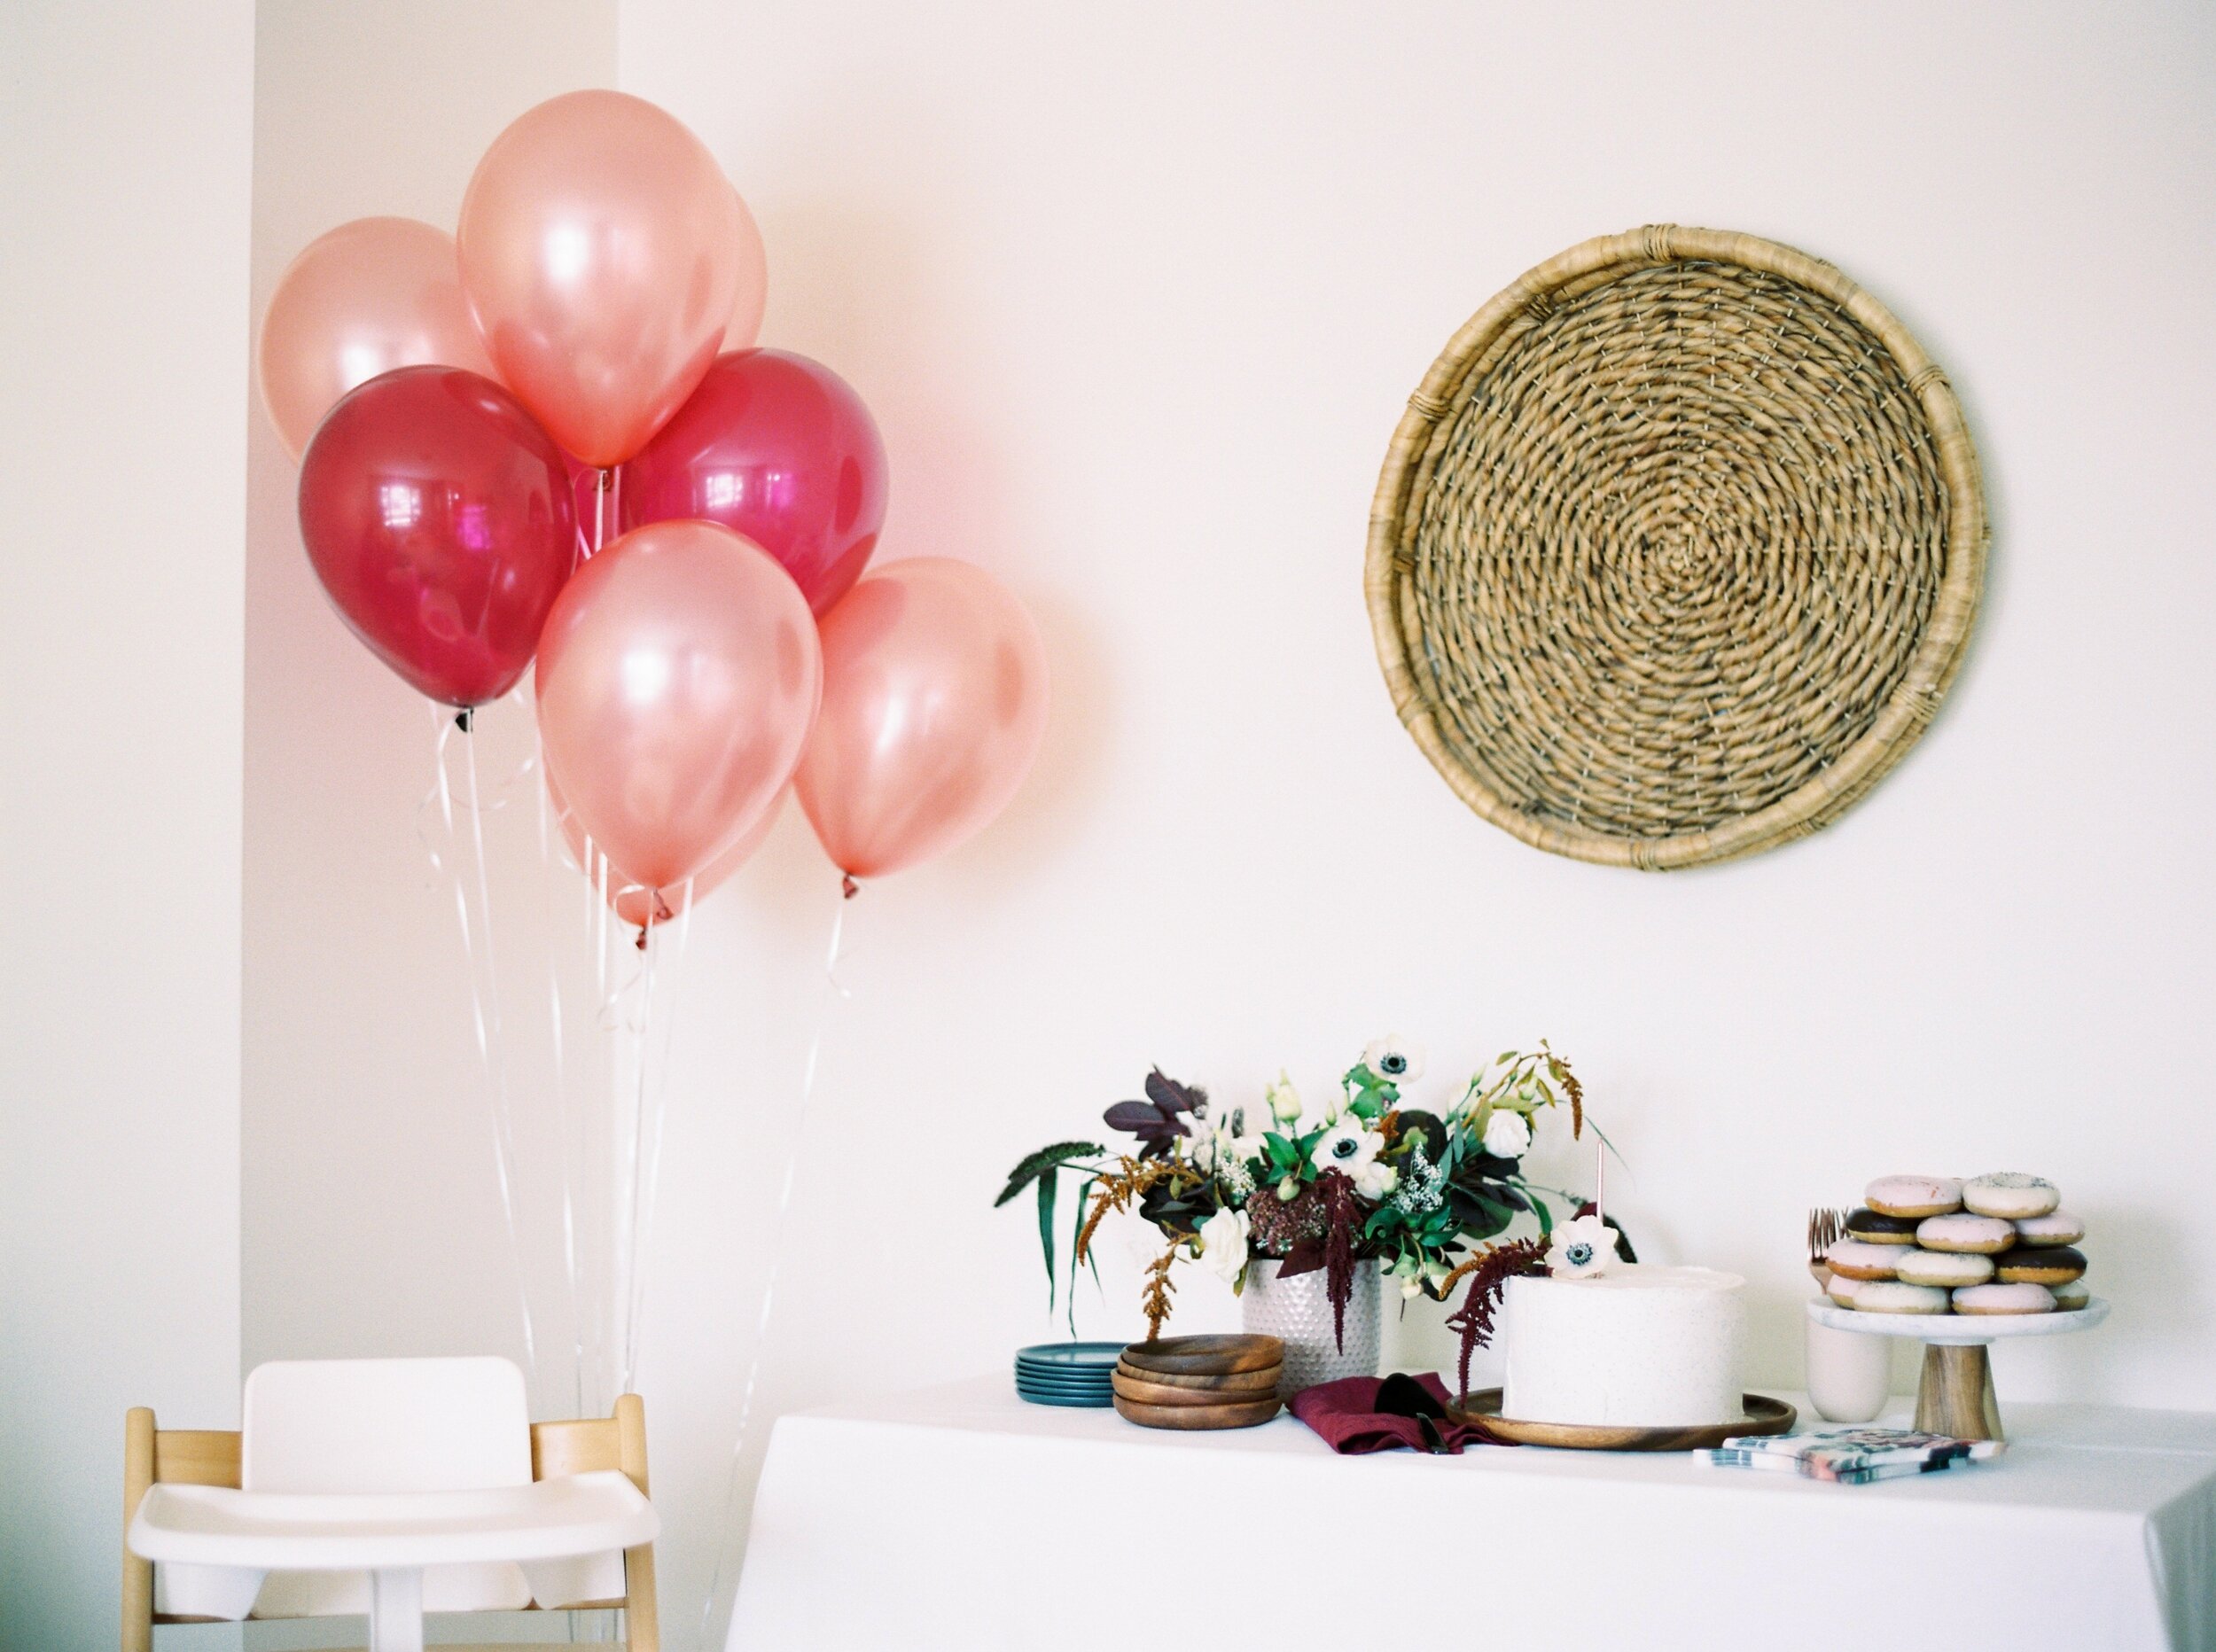  one year old birthday party ideas and decor 